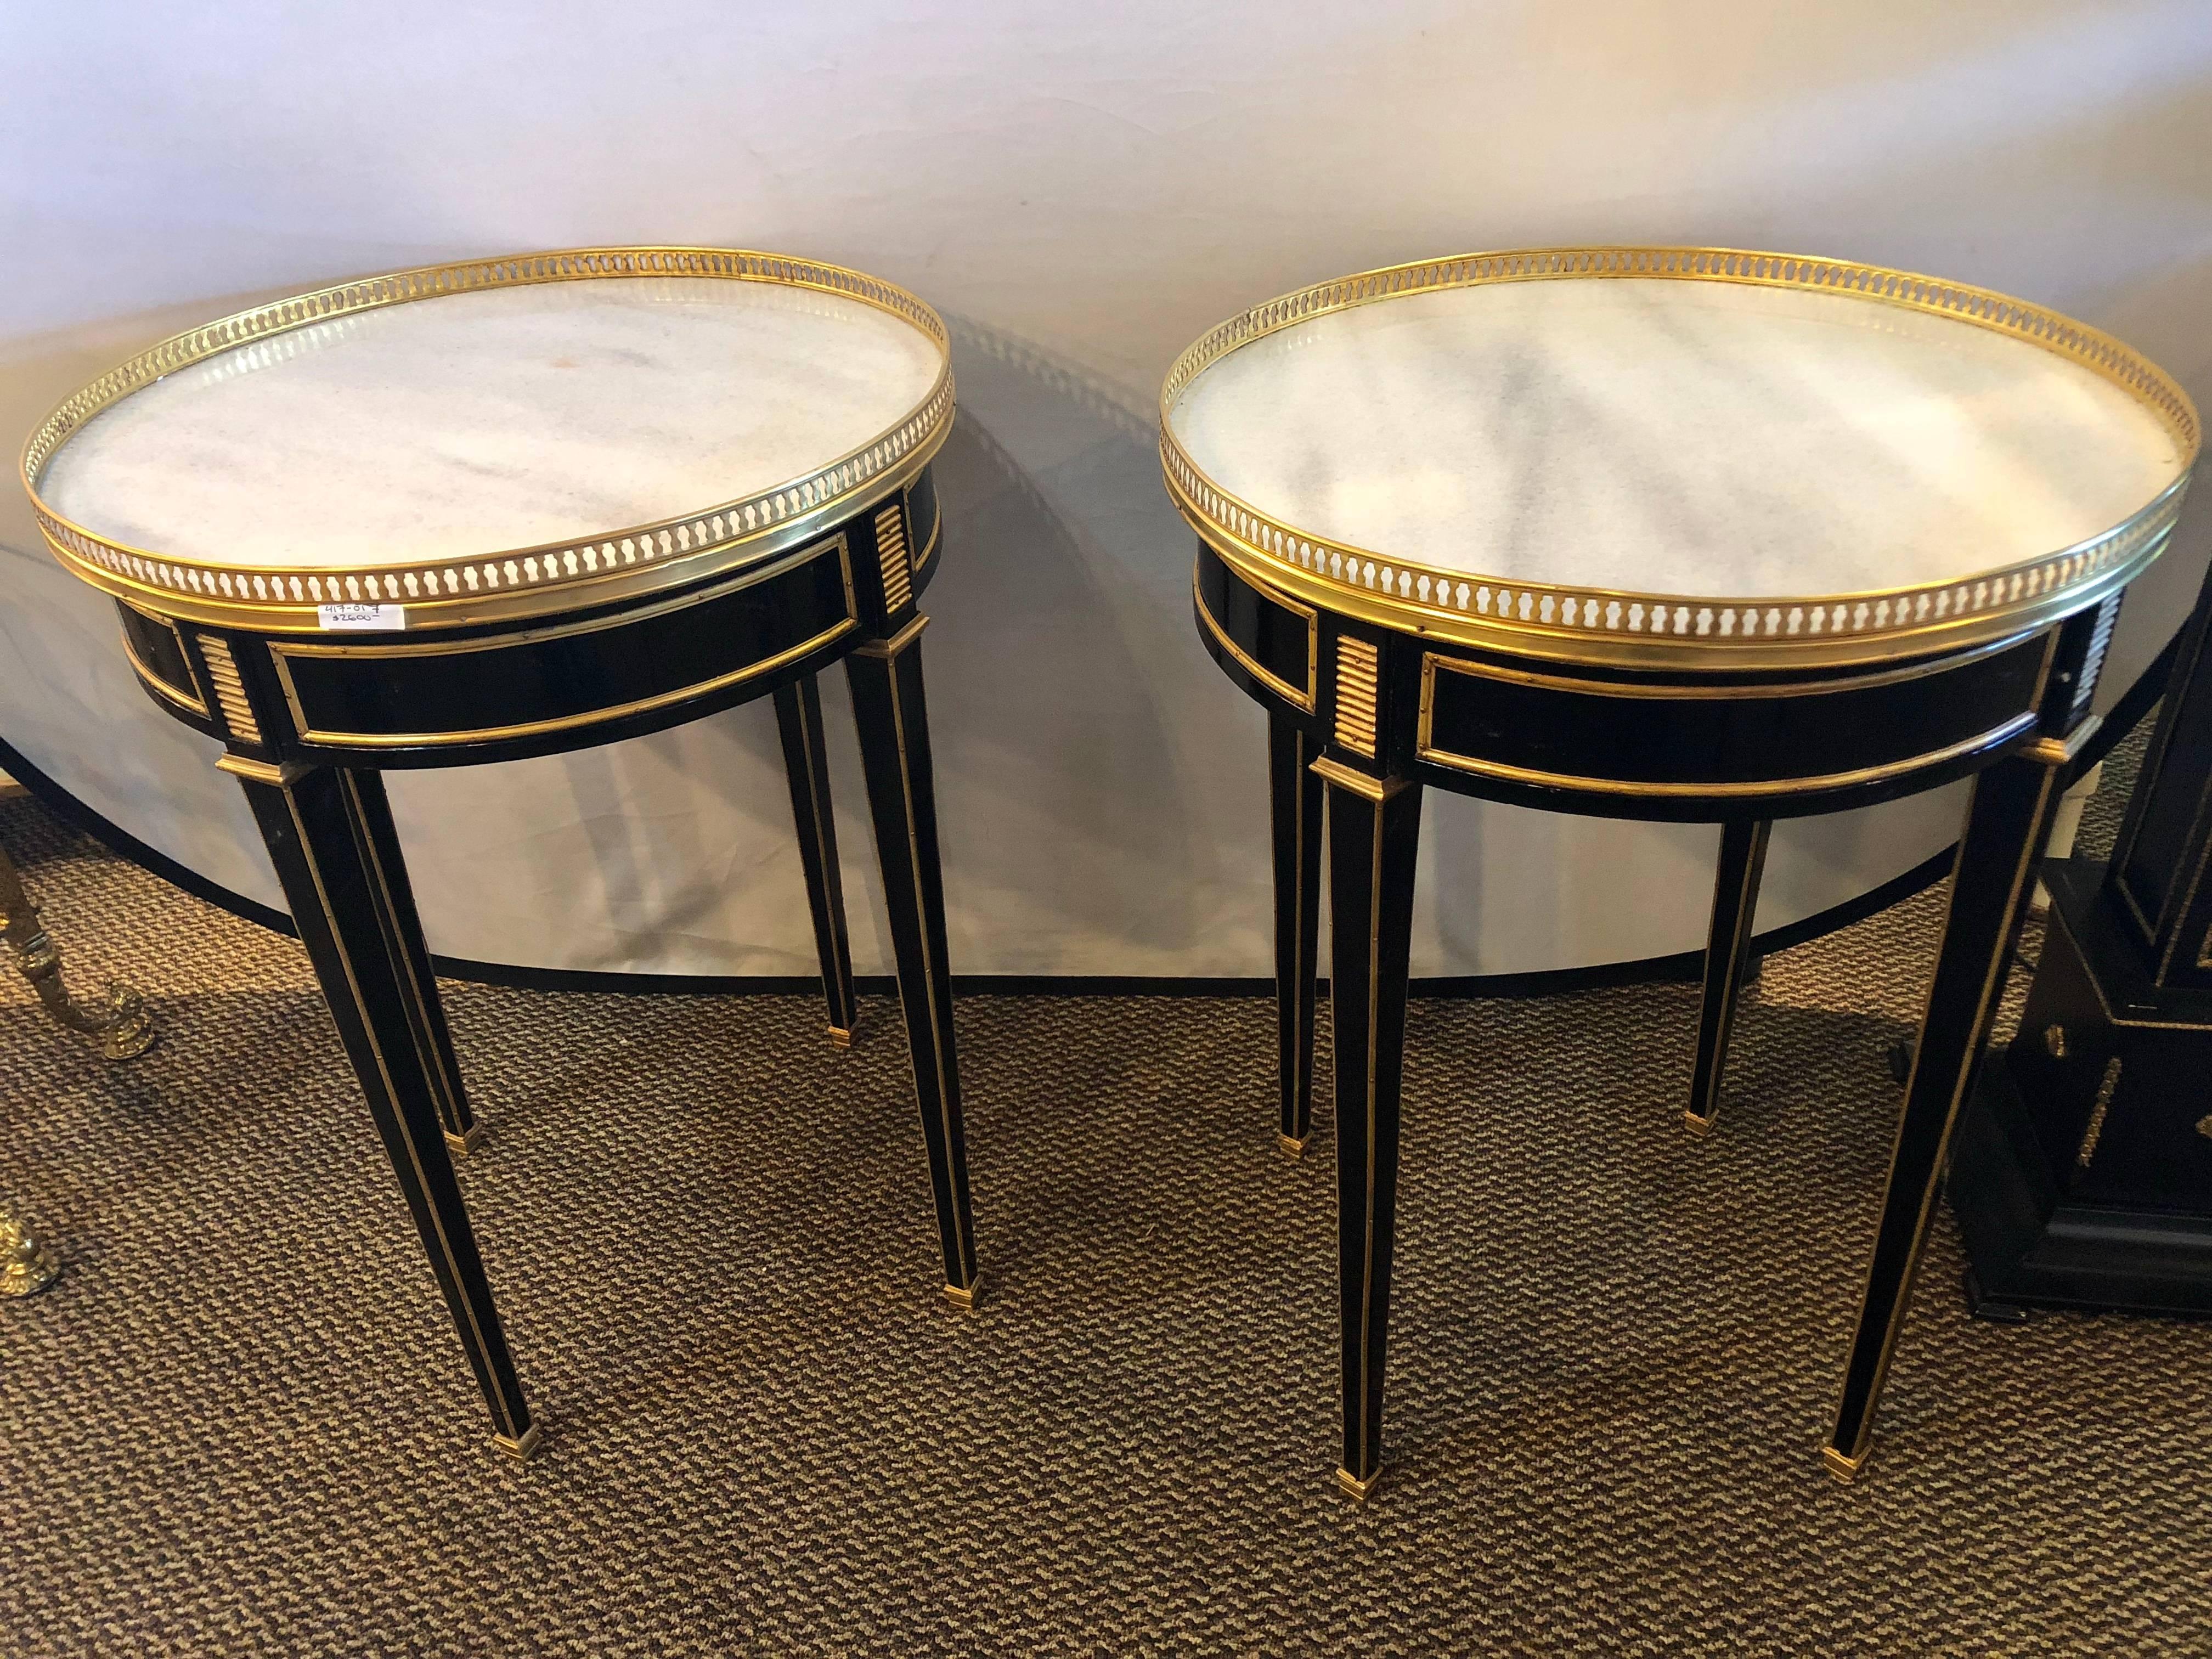 This is a fine pair of Louis XVI style ebony pierced bronze galleried Bouillotte or end tables in the manner of Maison Jansen depict the Hollywood Regency era at its height. On bronze sabots the ebony tapering legs have this very rare and fine